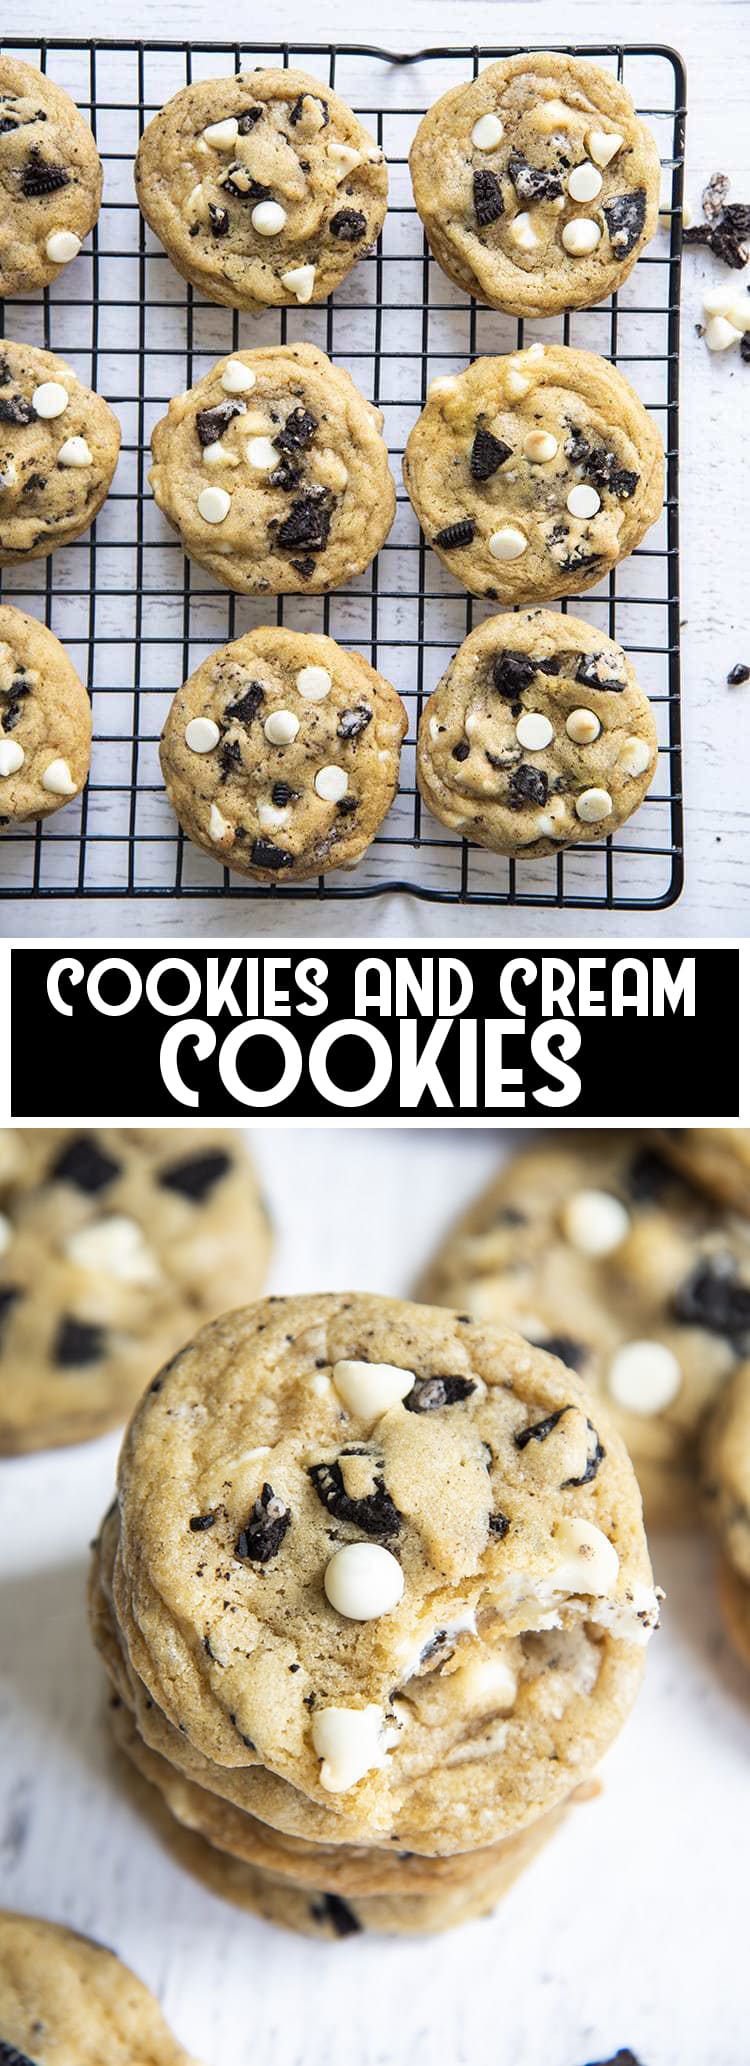 2 image collage of cookies and cream cookies with text overlay that reads cookies and cream cookies.